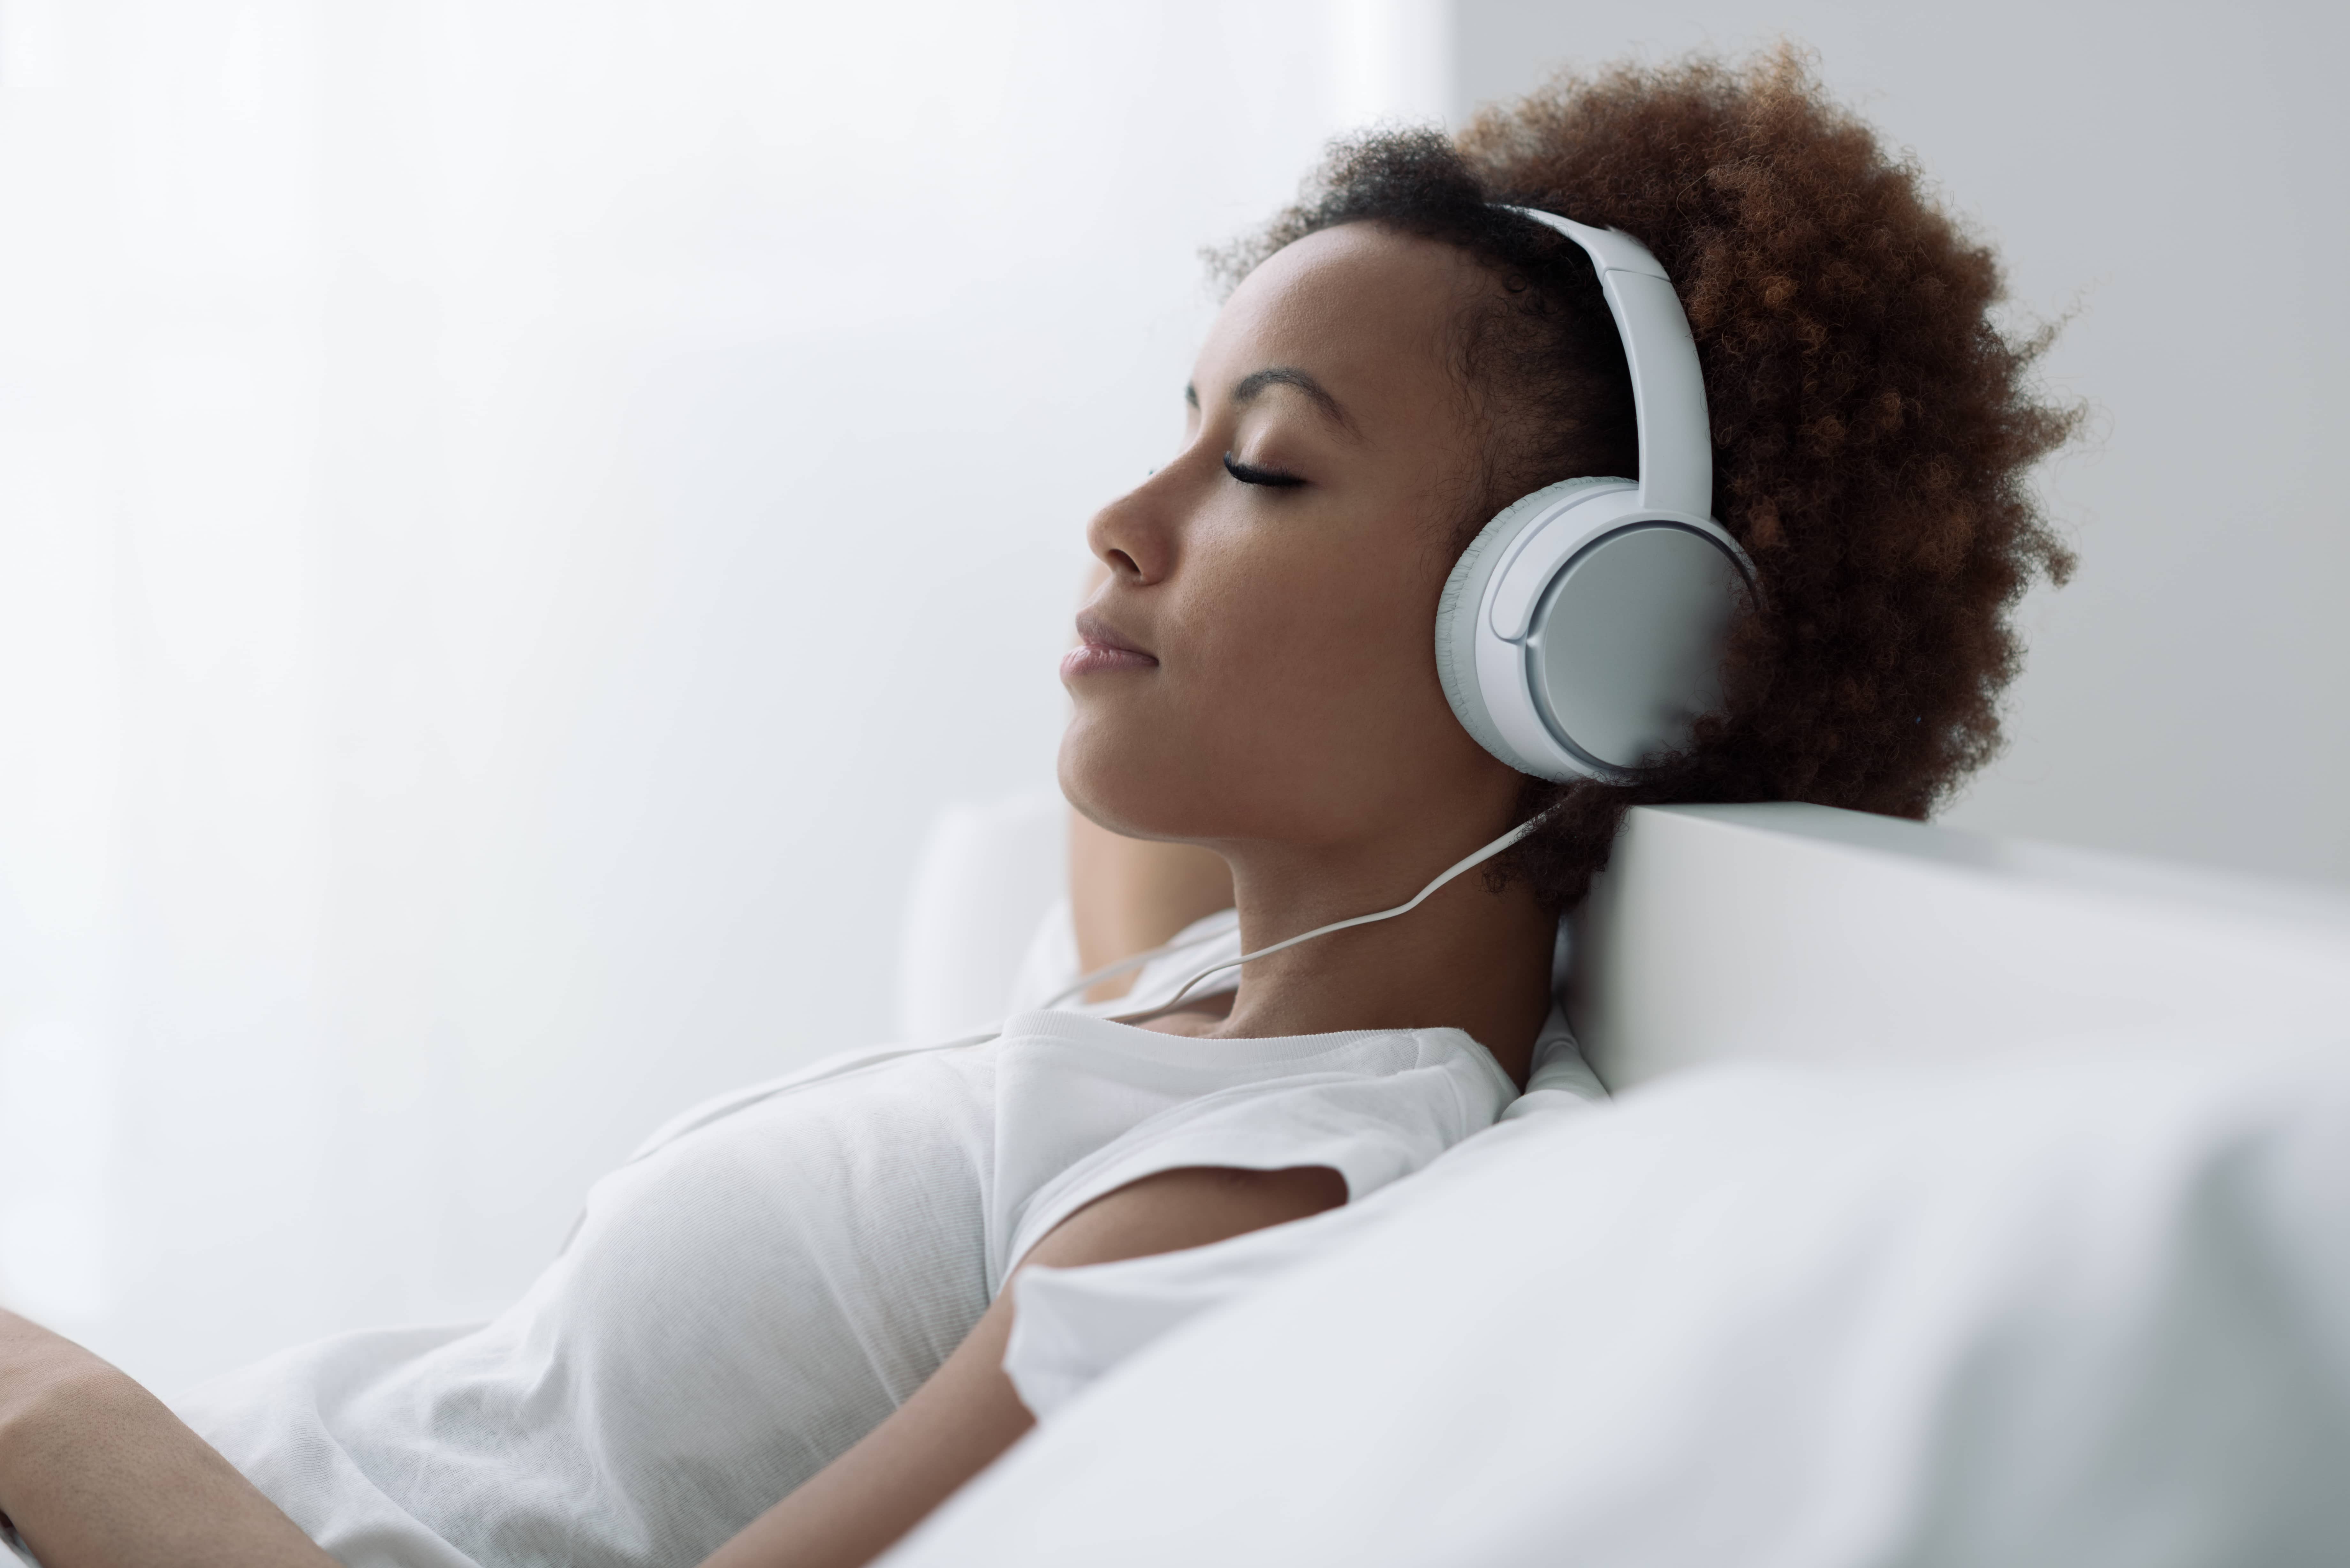 Black woman listening to music to relieve stress